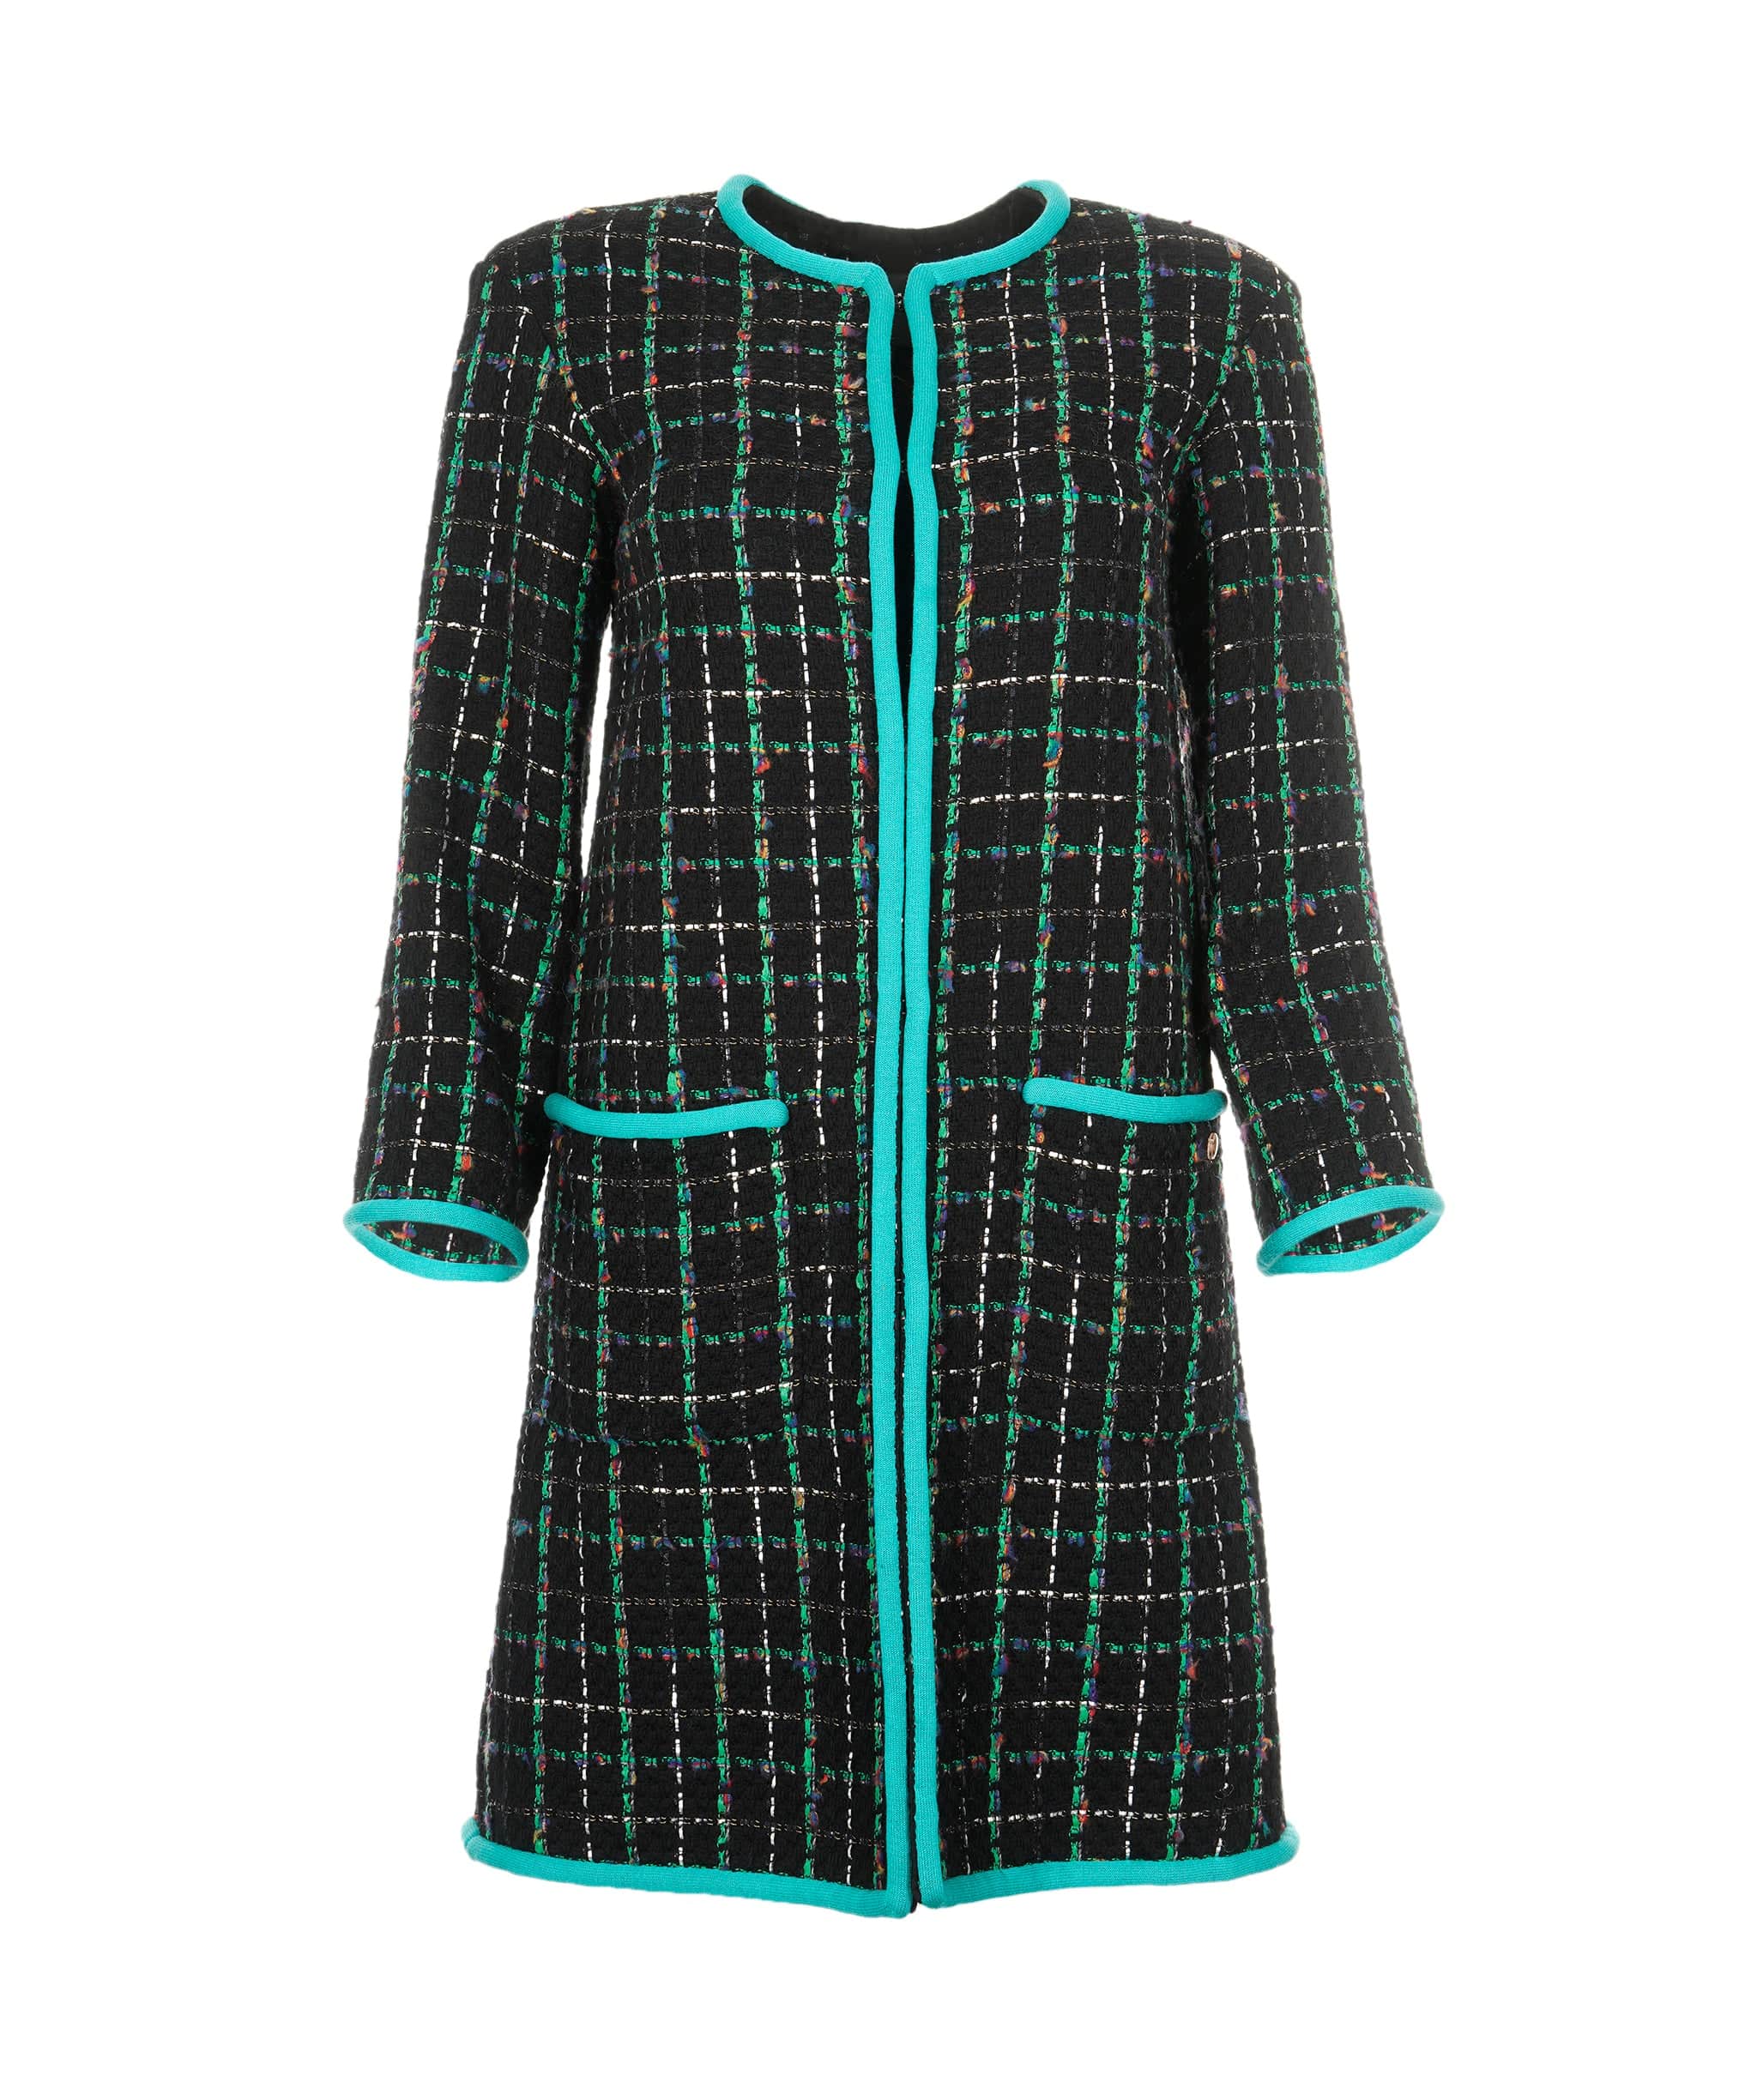 Chanel Chanel Jacket long tweed black and green  AVC1261